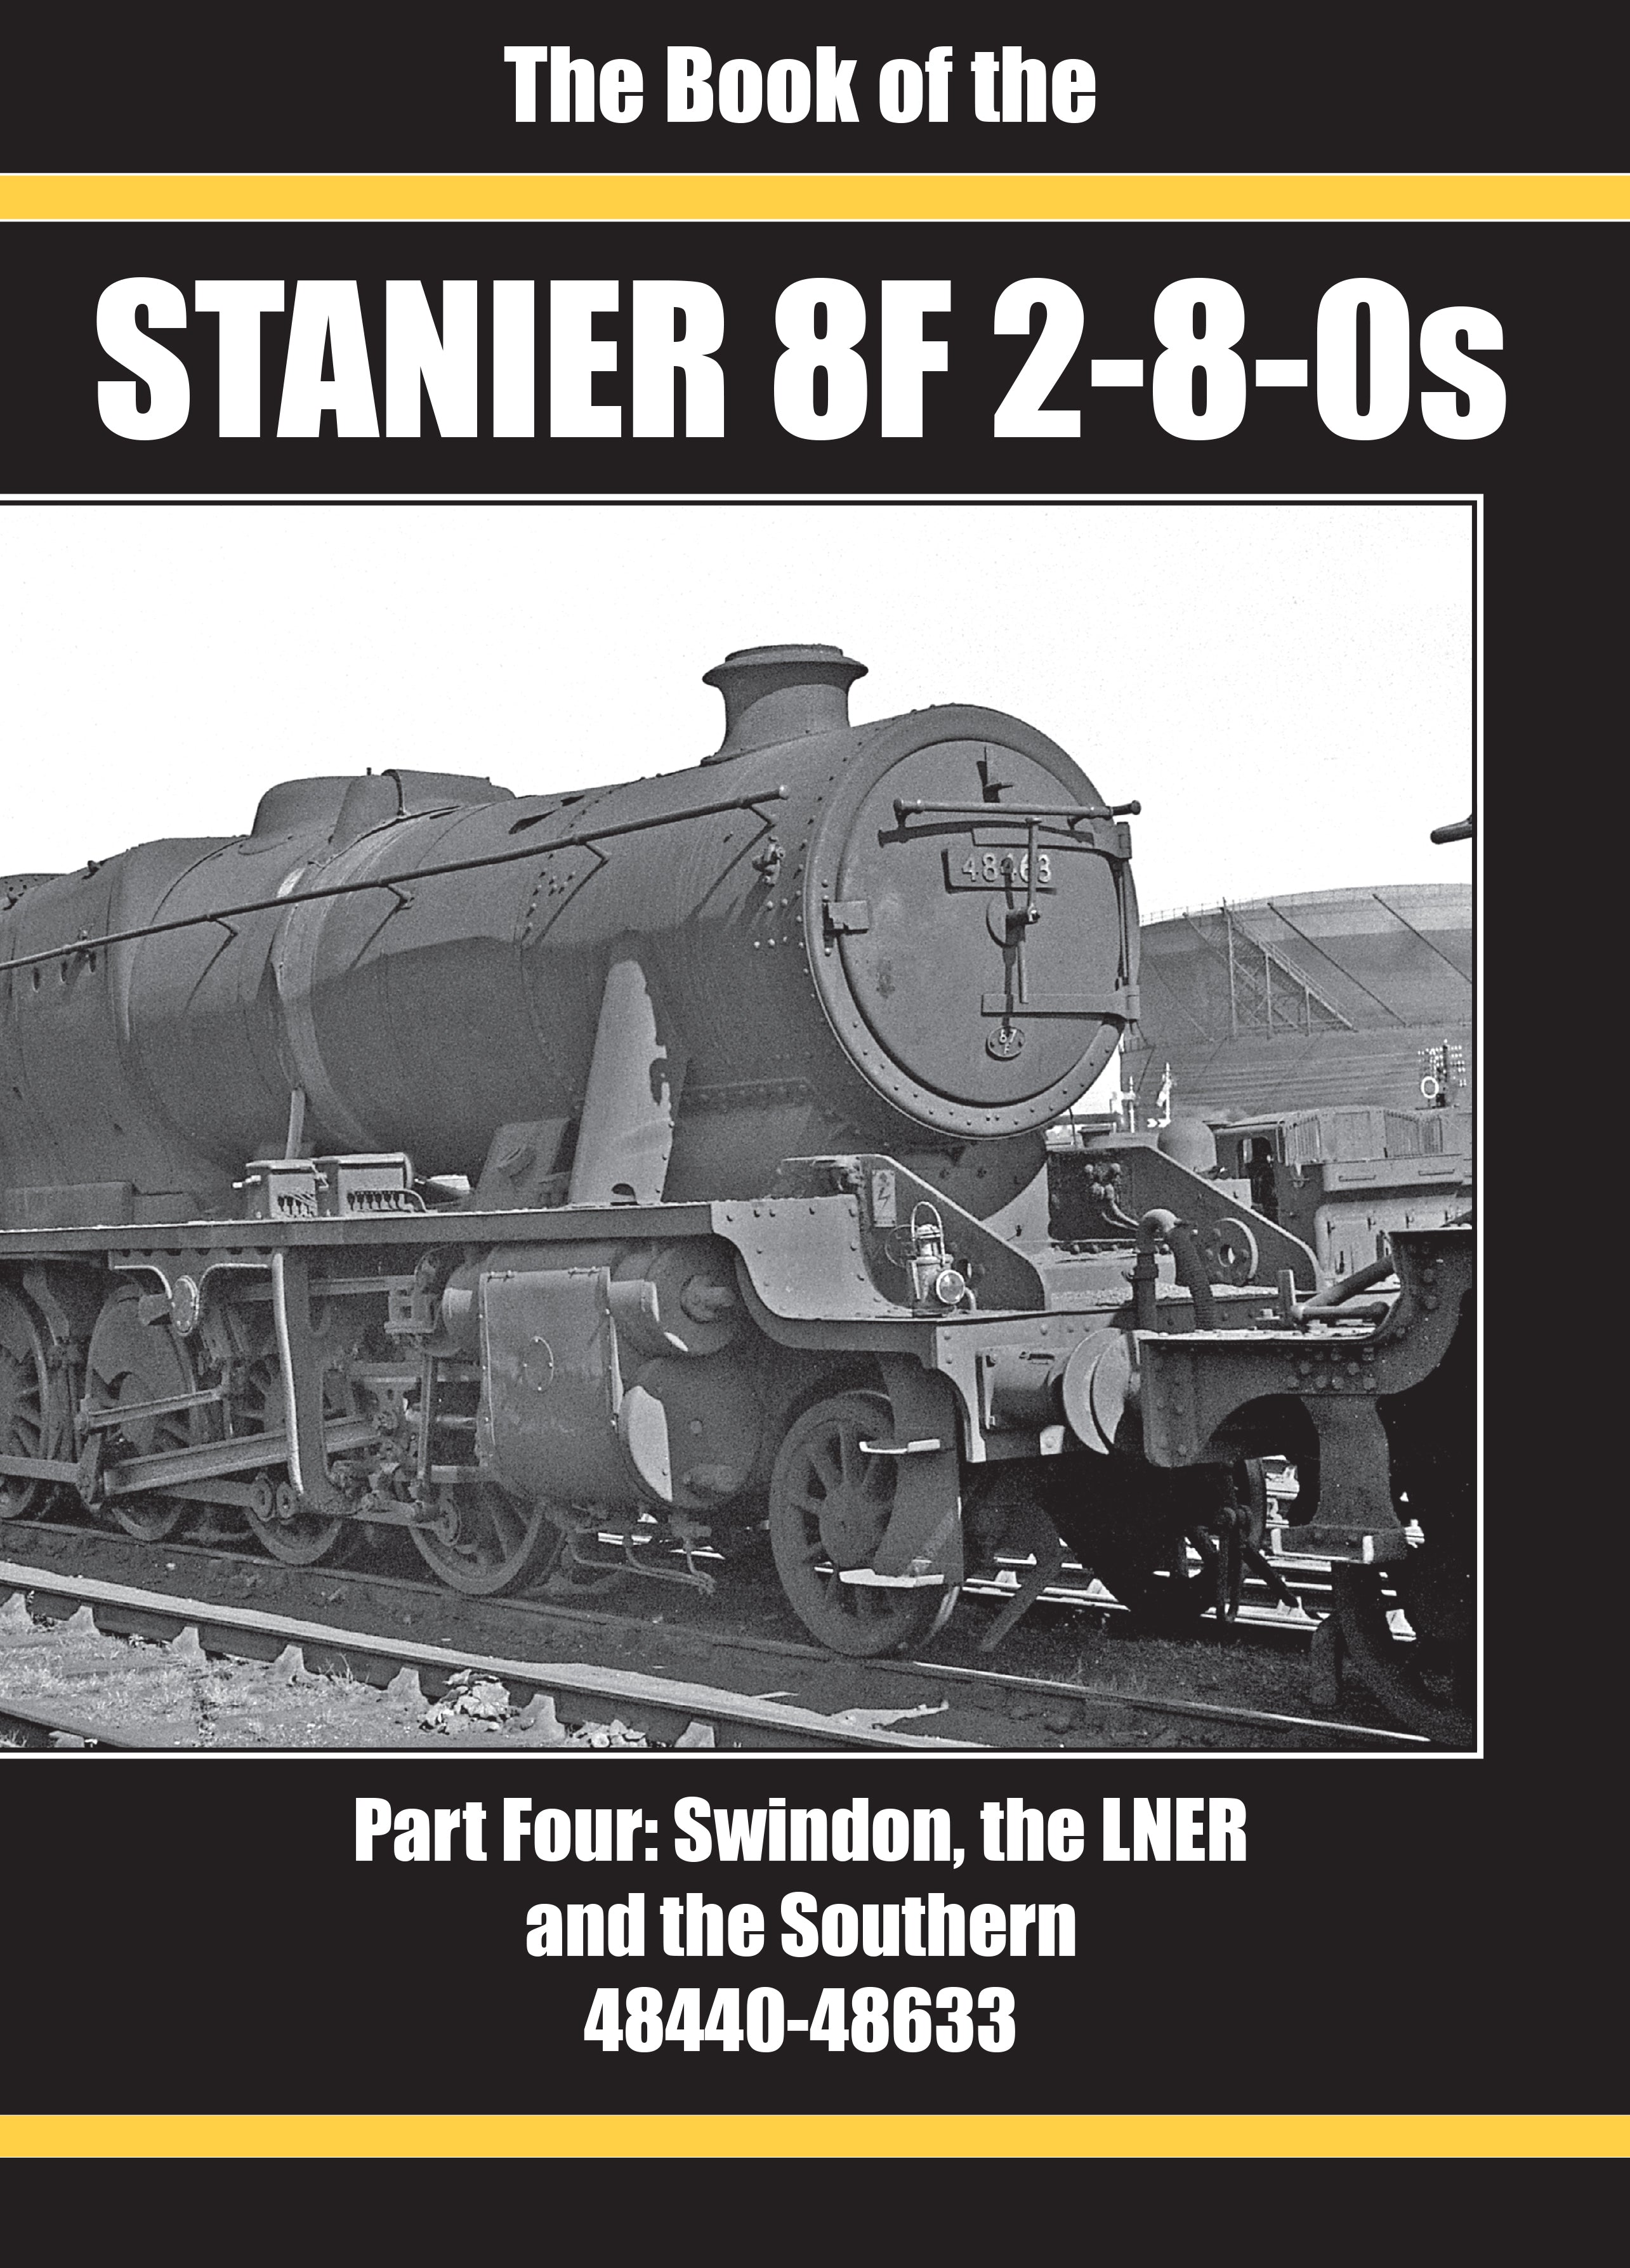 The Book of the STANIER 8F 2-8-0s Part 4: Swindon, the LNER and the Southern Nos. 48440-48633